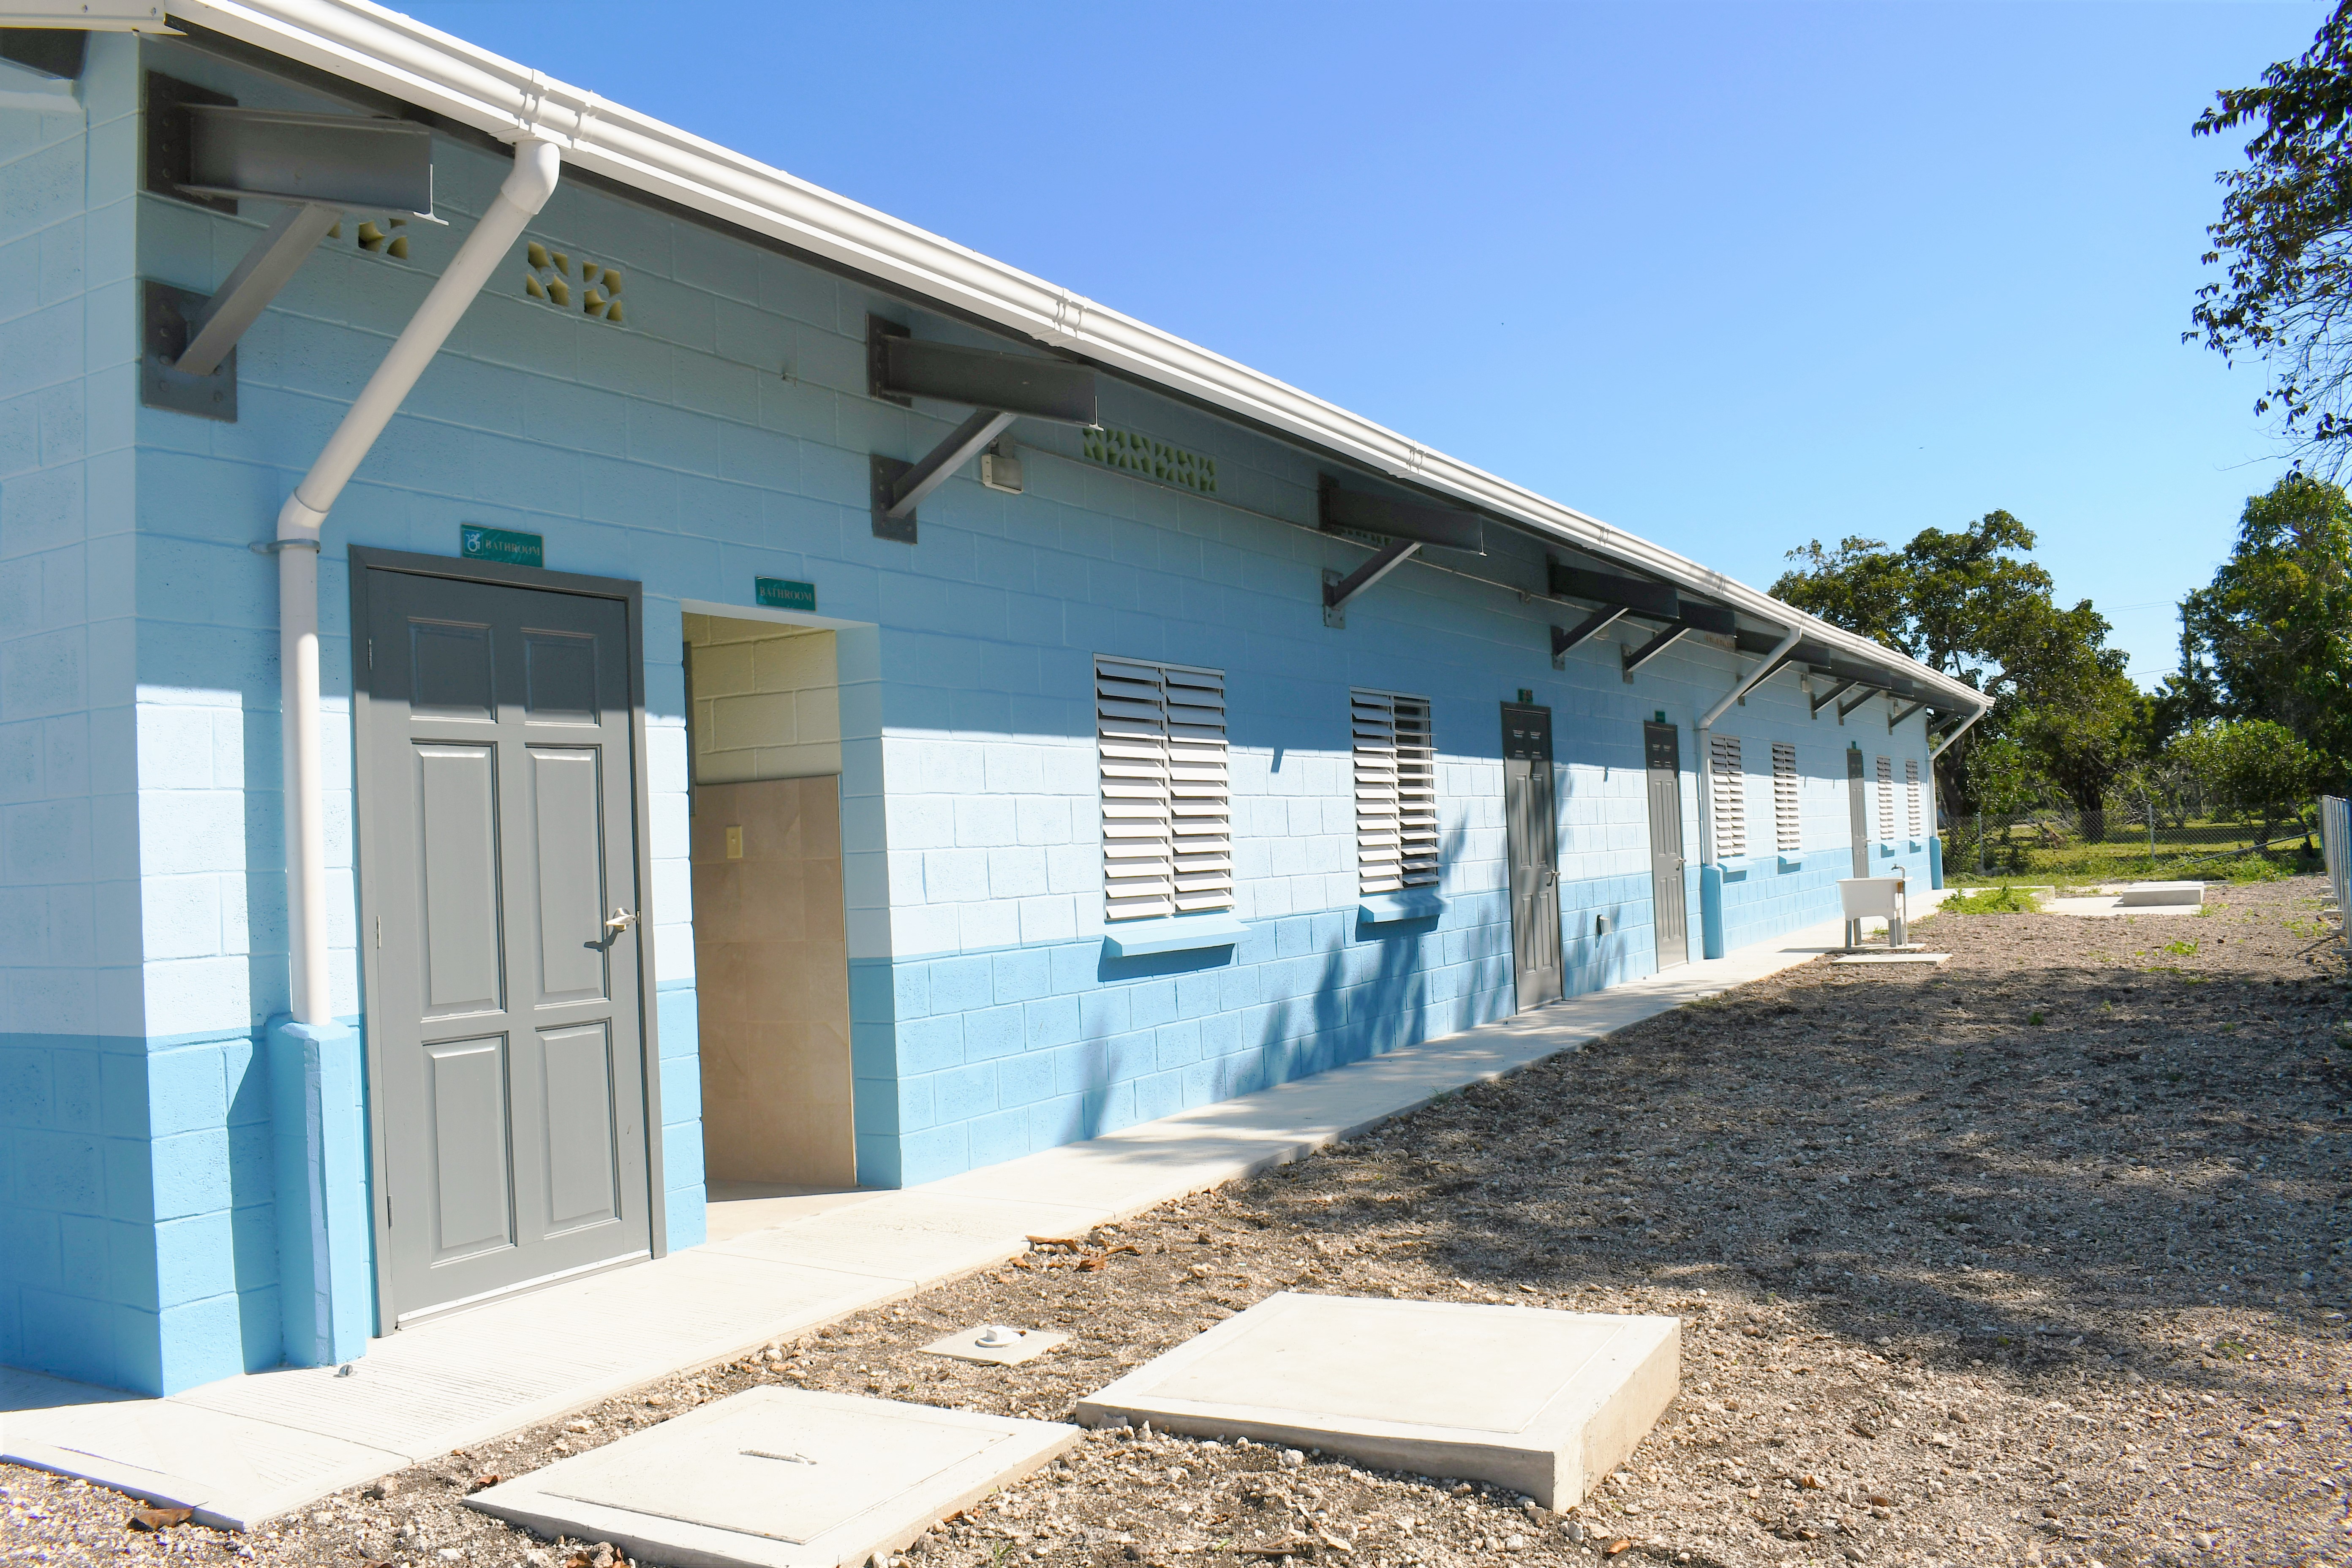 Inauguration of New School Building for San Pedro Government School